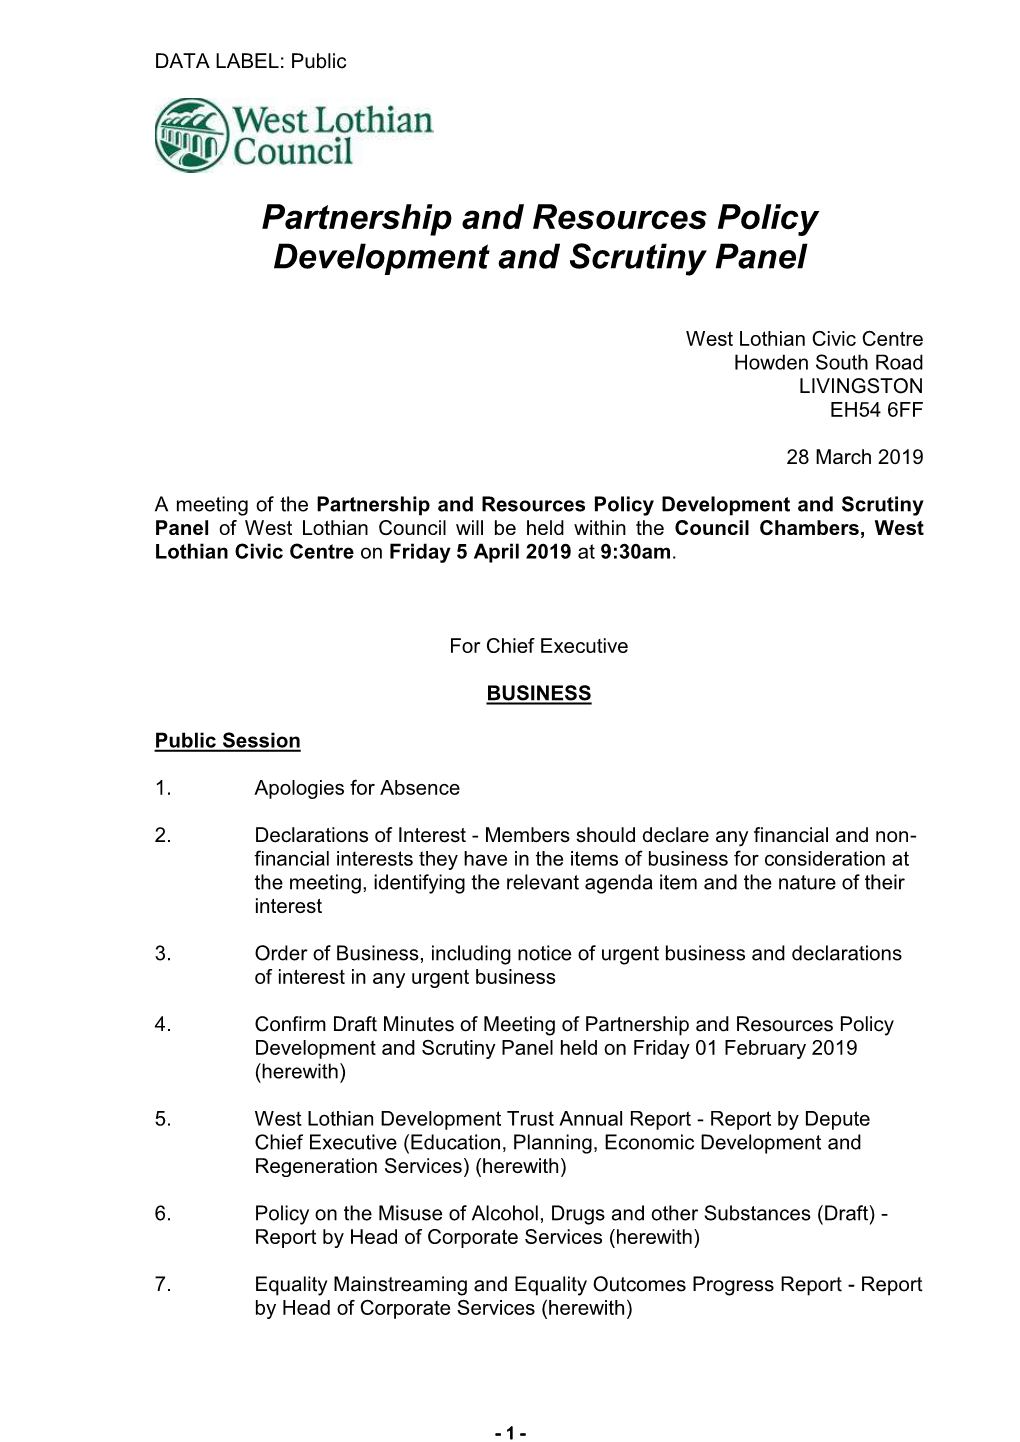 Partnership and Resources Policy Development and Scrutiny Panel